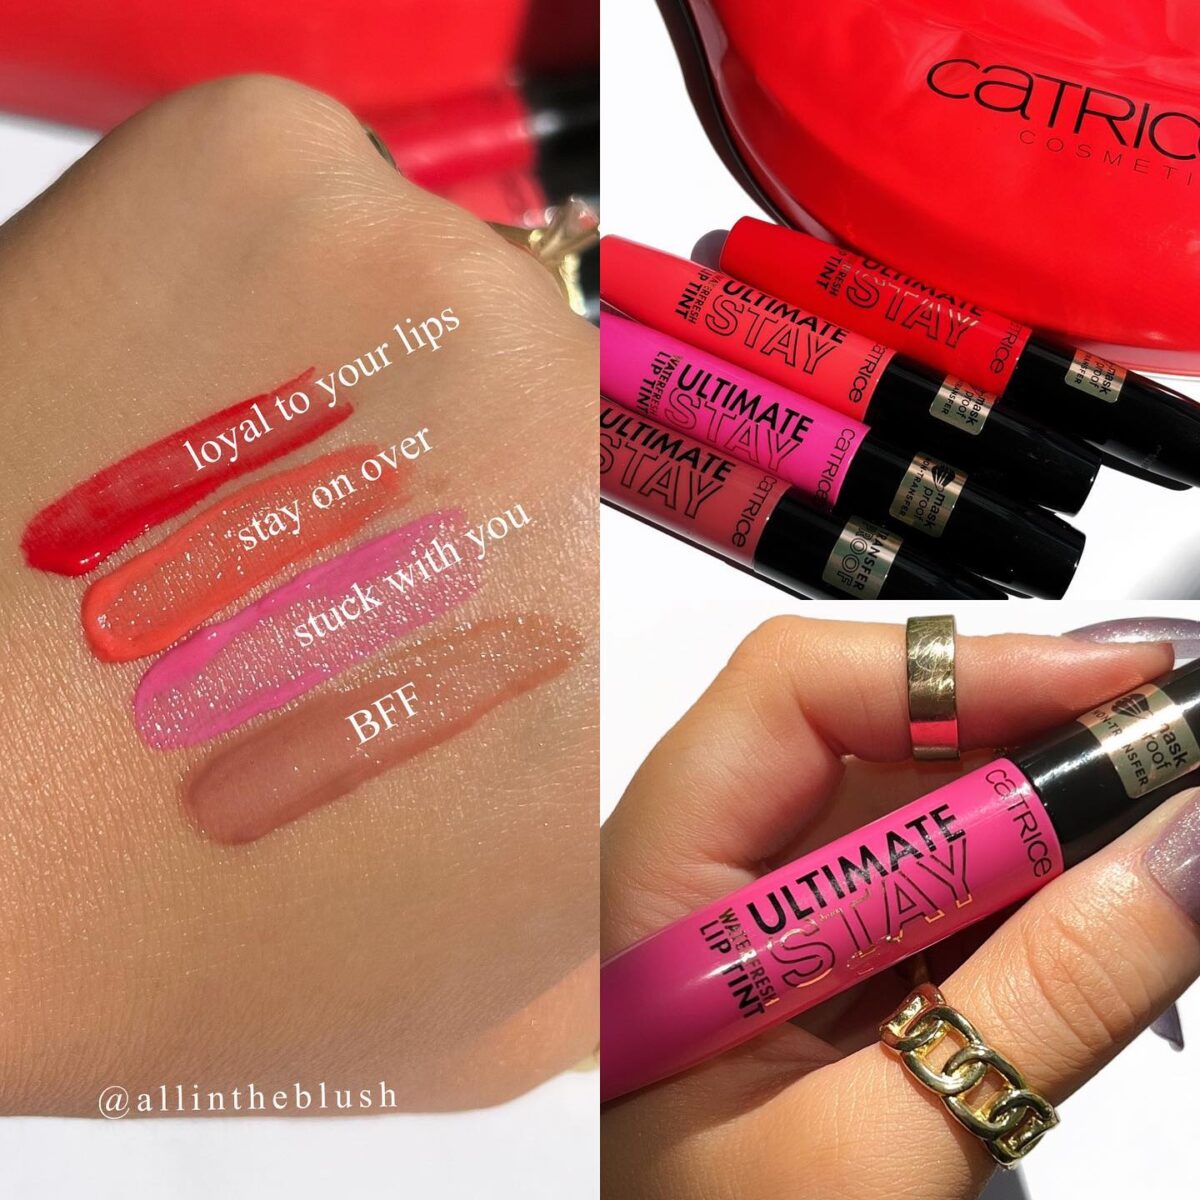 NEW from Catrice Cosmetics: Ulitmate Stay Waterfresh Lip Tint – Review & Swatches